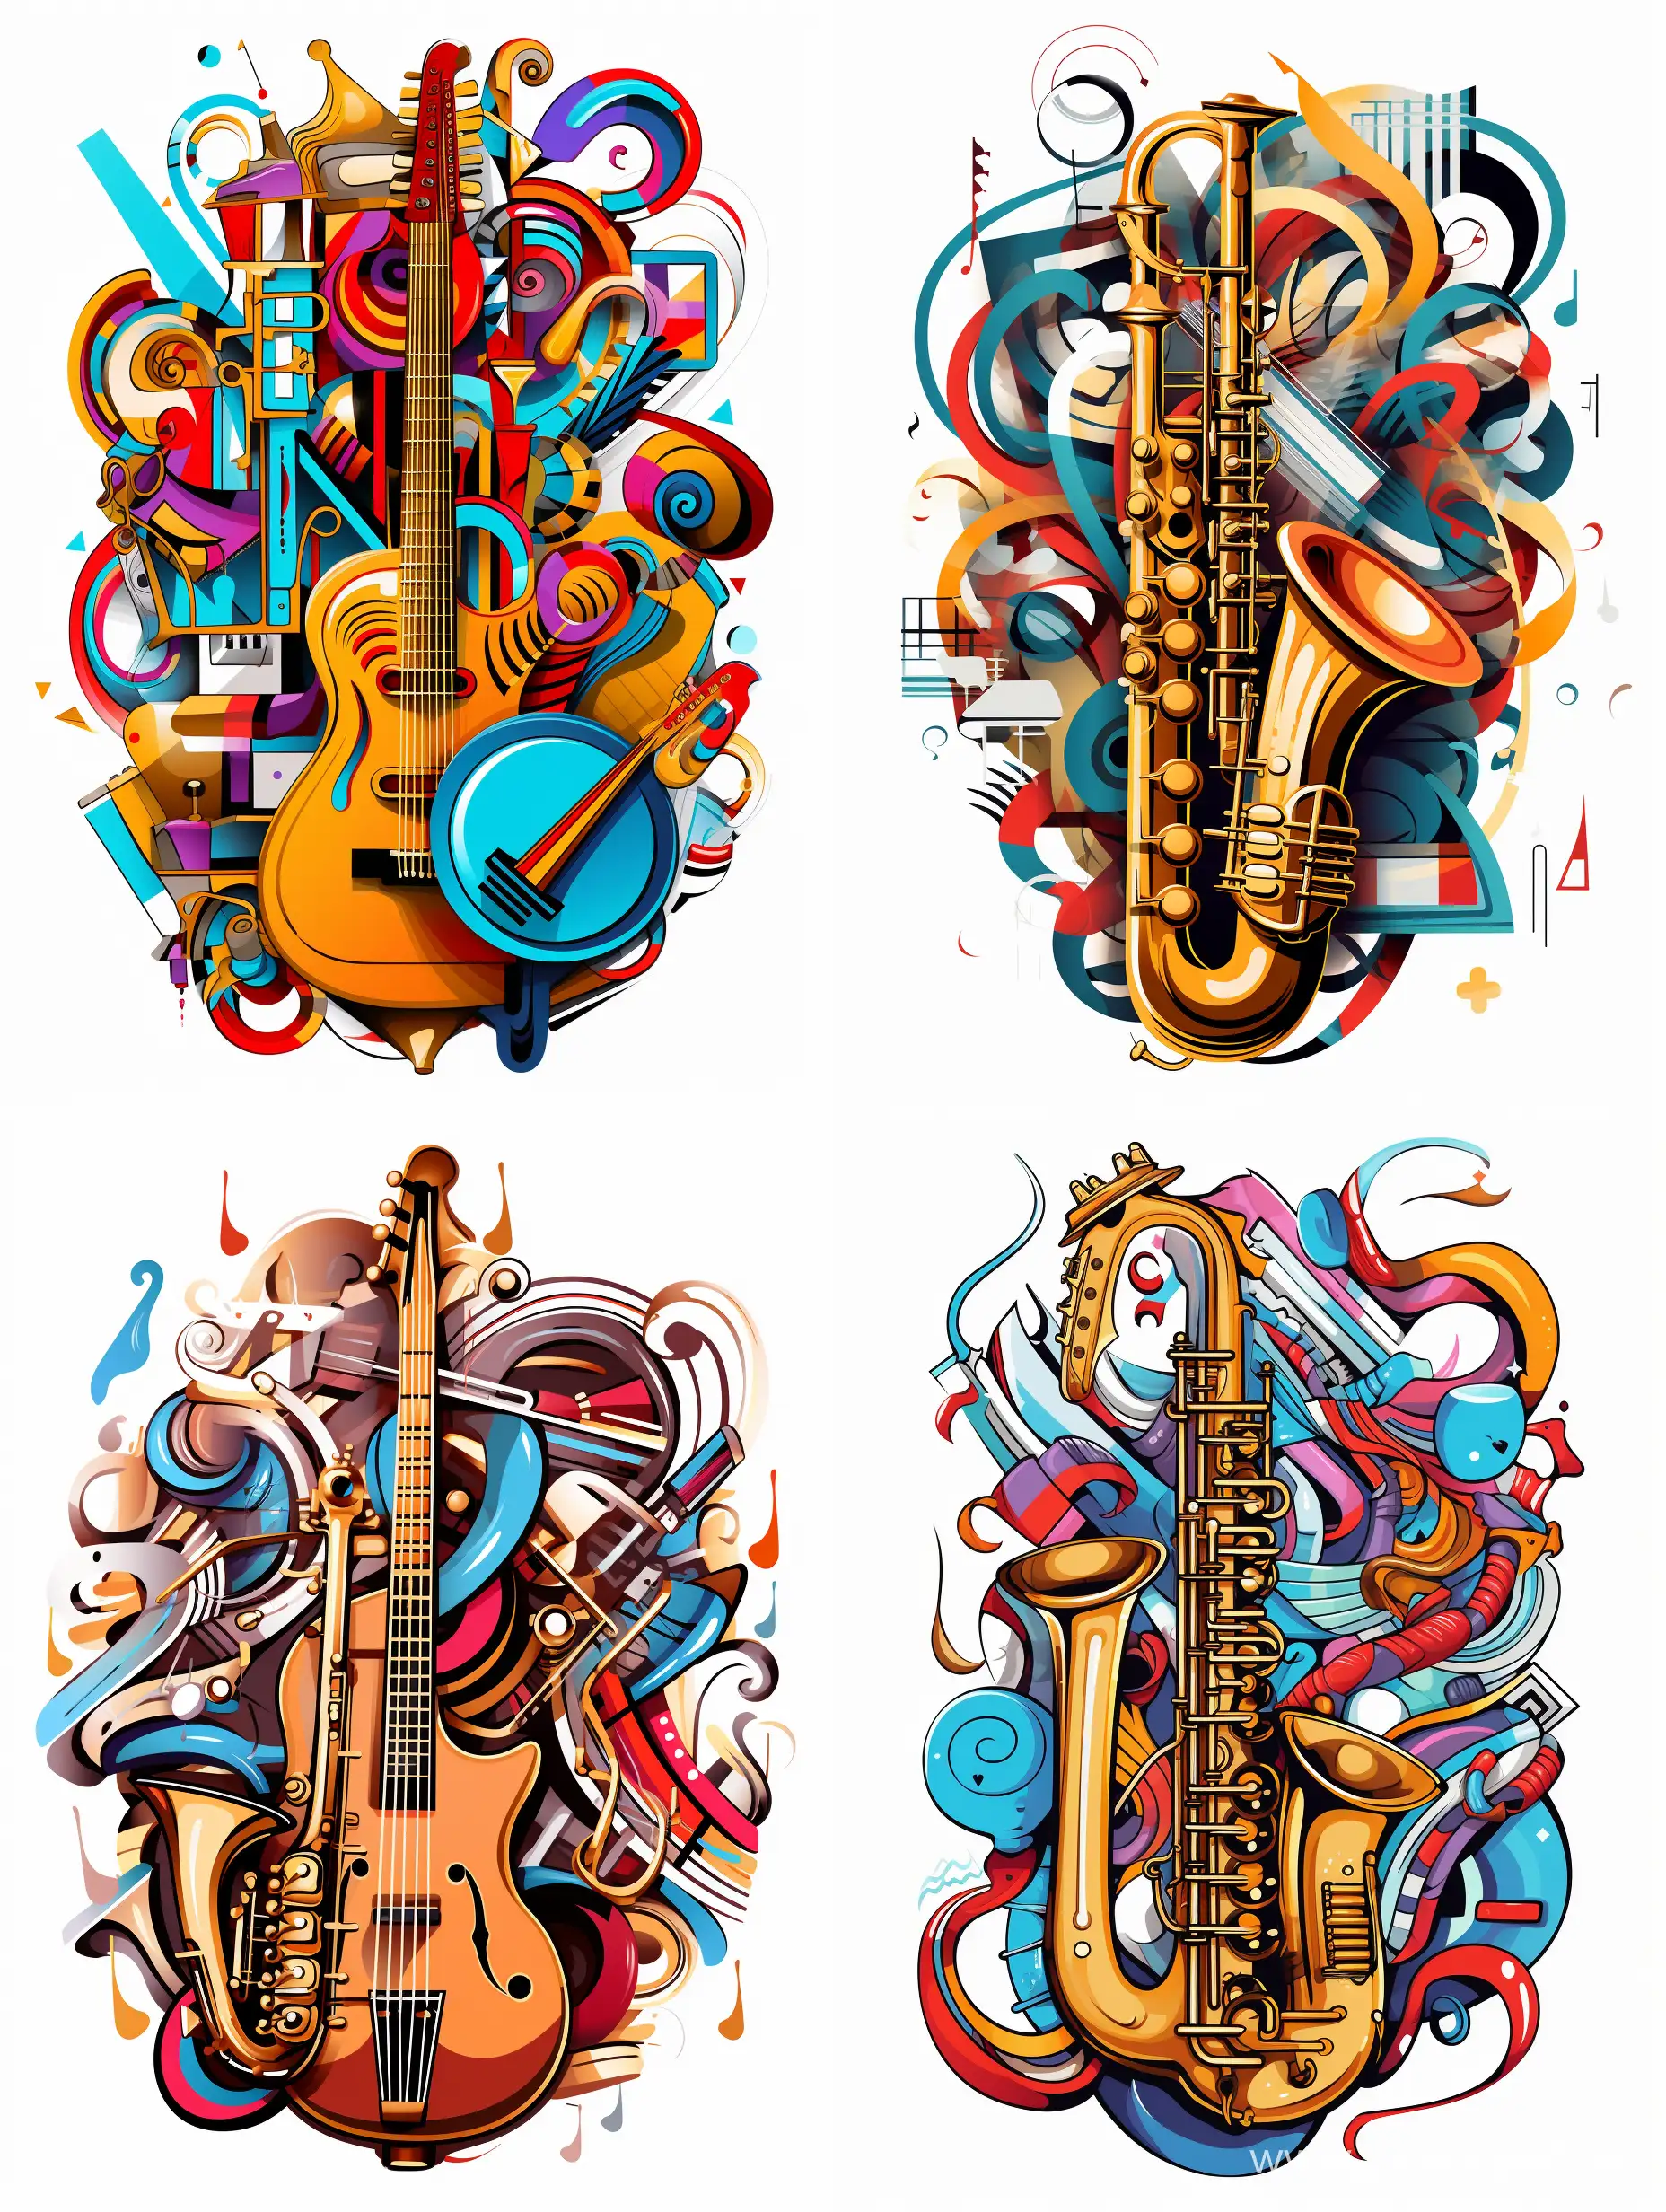 HeartShaped-Pop-Art-Musical-Instruments-on-White-Background